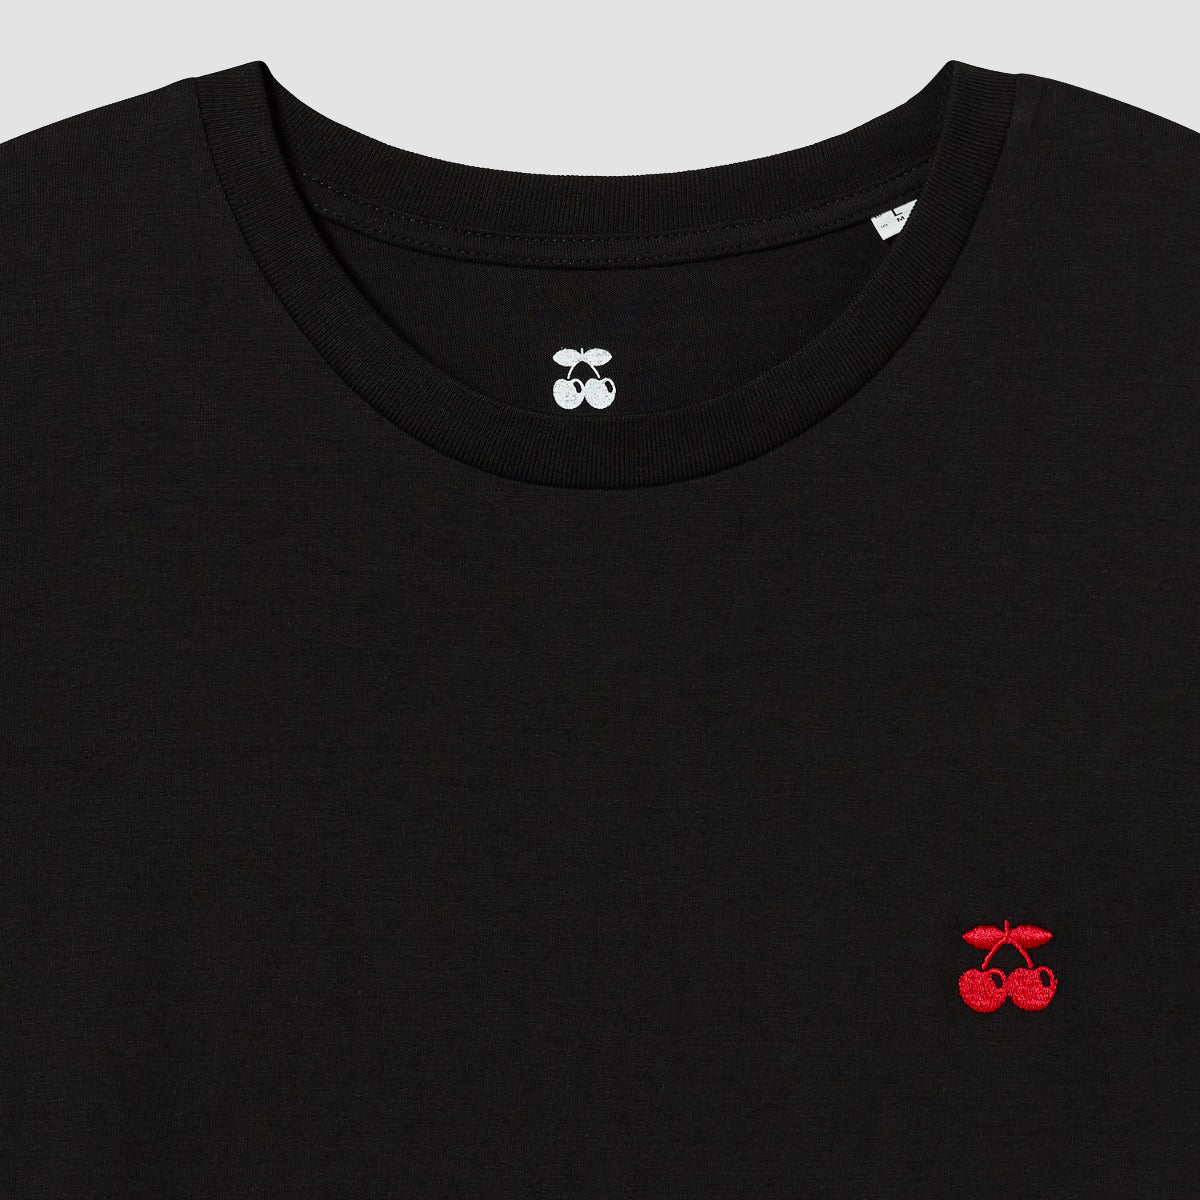 MEN'S EMBROIDERED CHERRY T-SHIRT